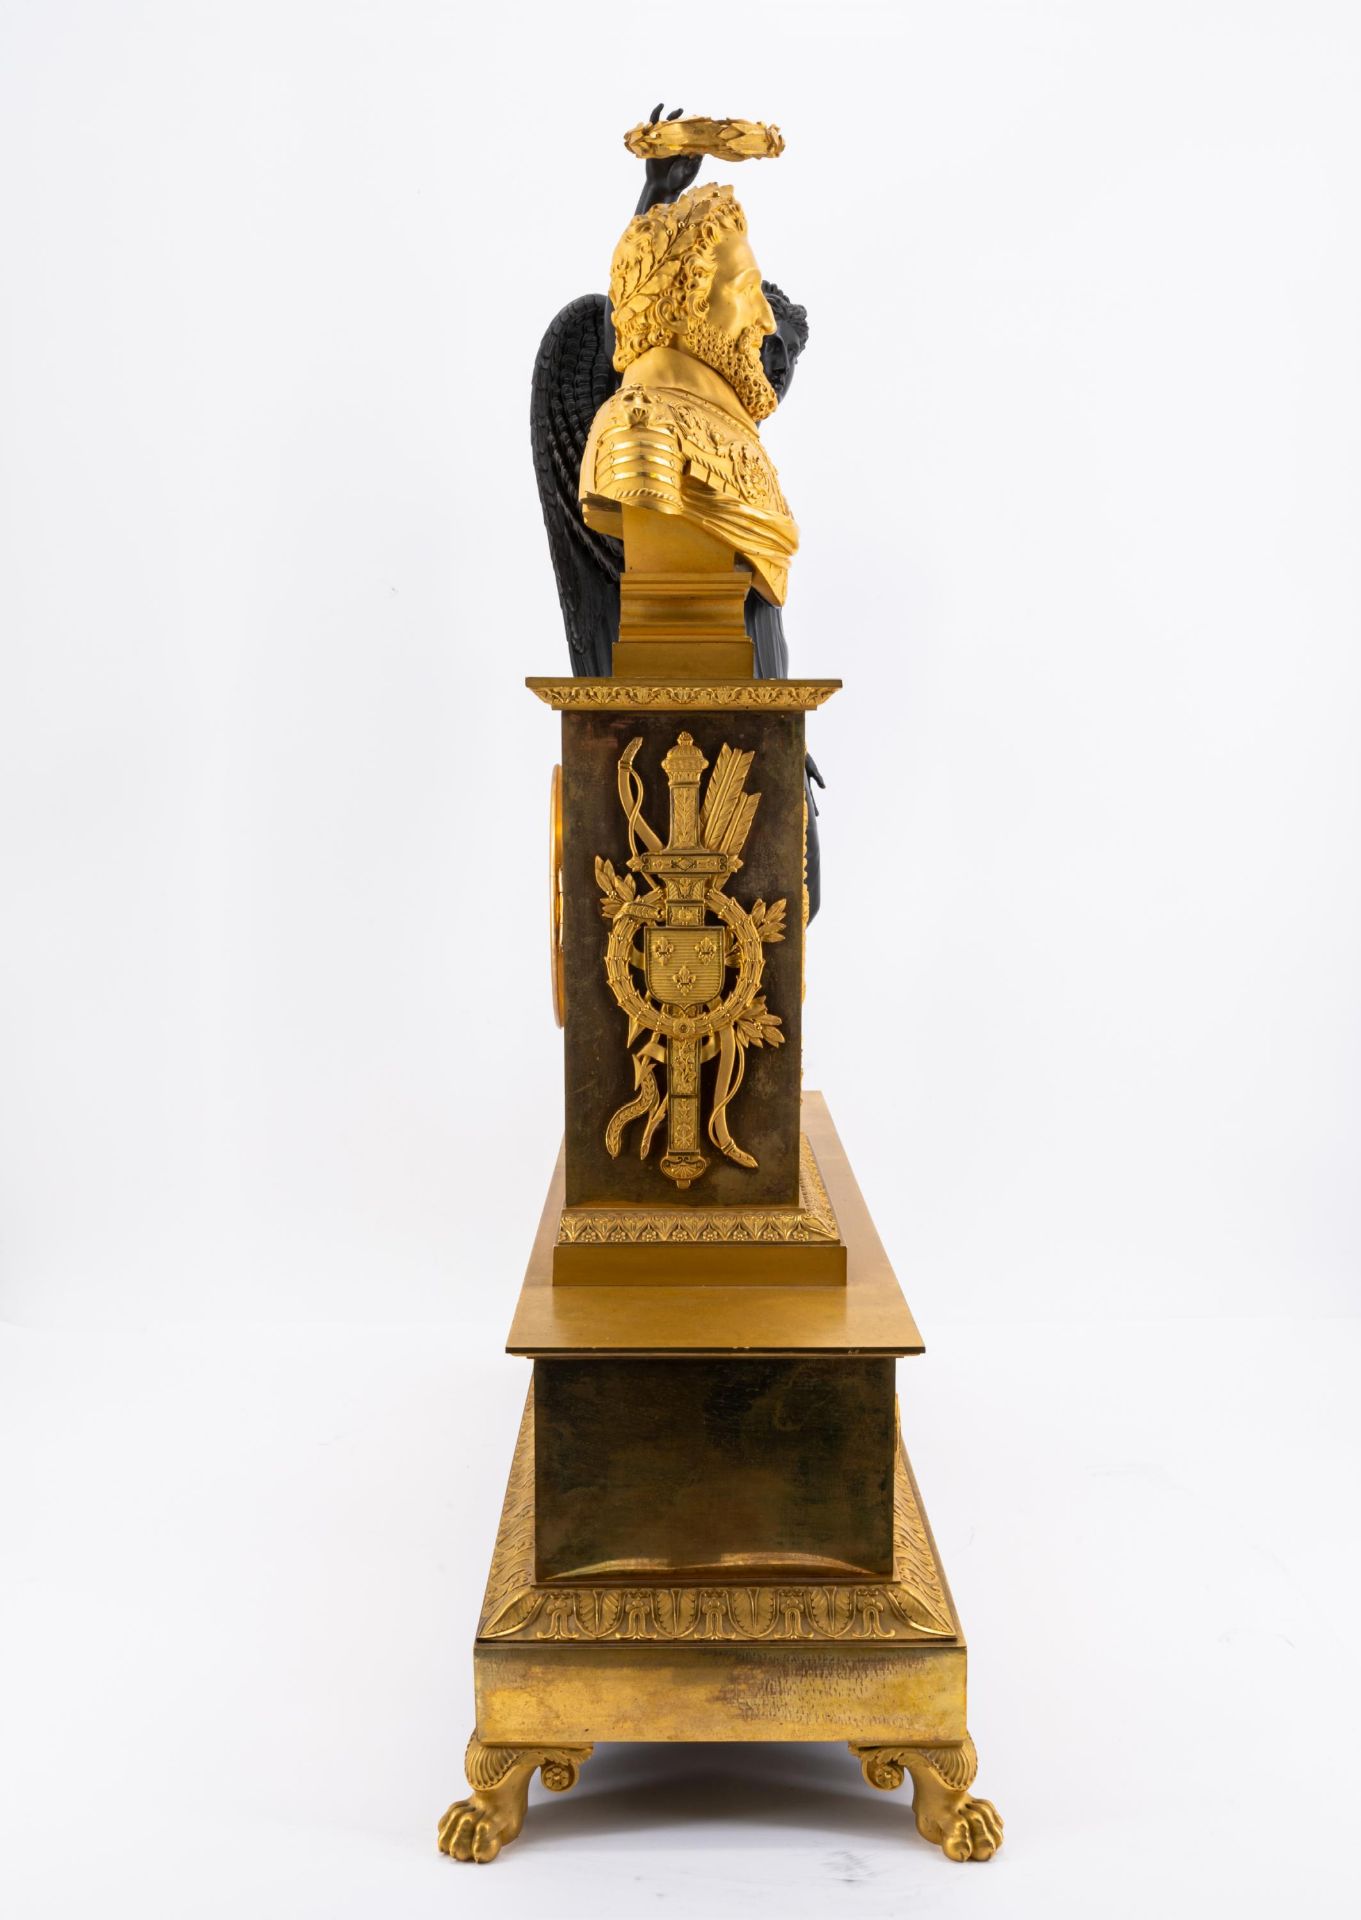 Monumental pendulum clock with bust of Henry IV and Victoria - Image 4 of 5